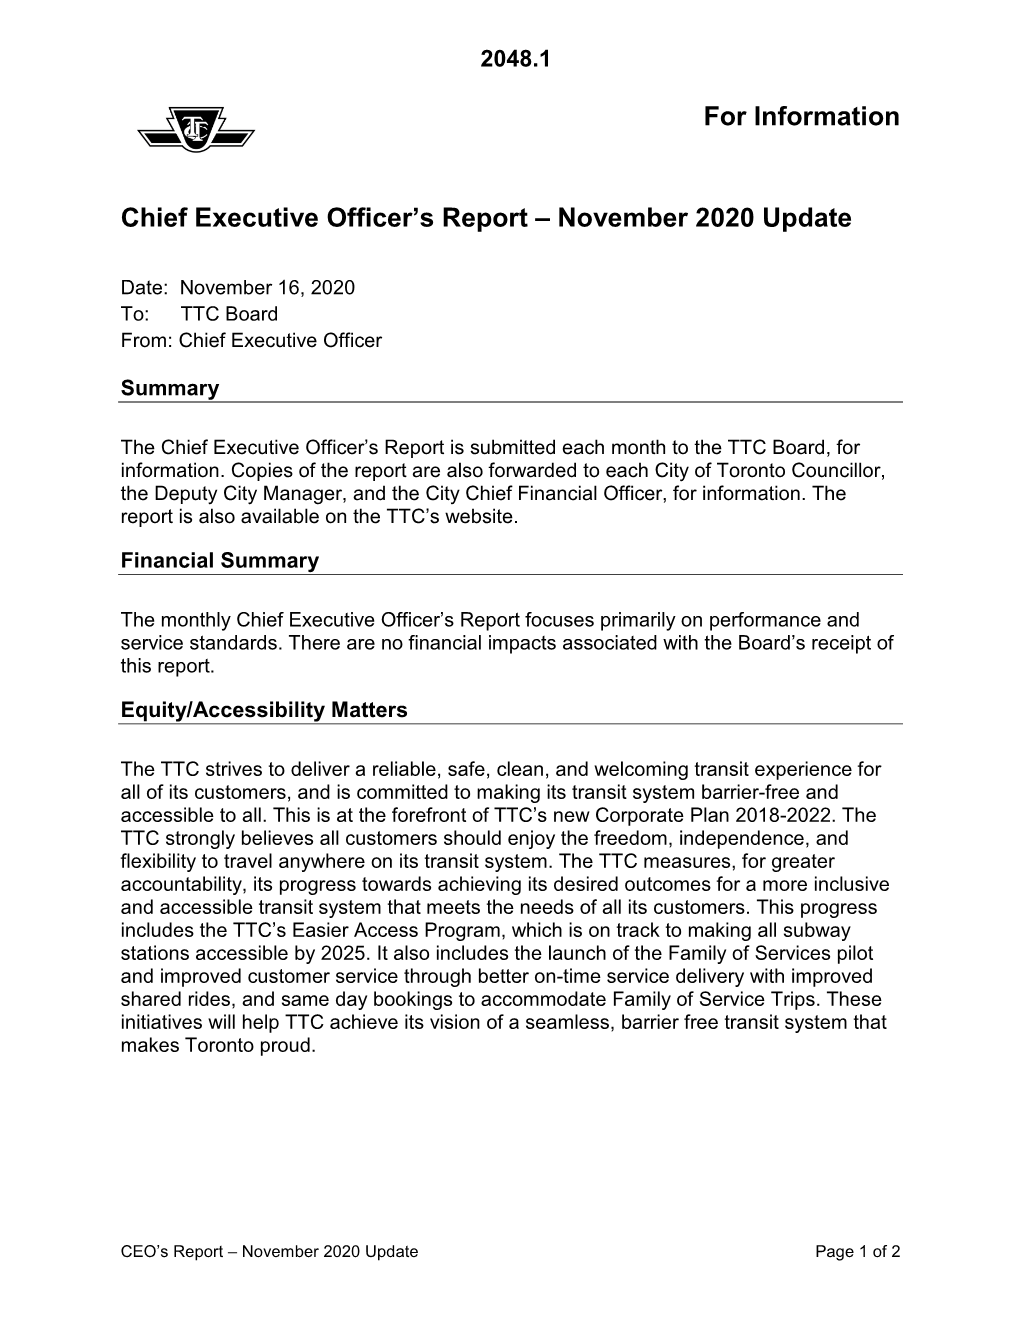 For Information Chief Executive Officer's Report – November 2020 Update